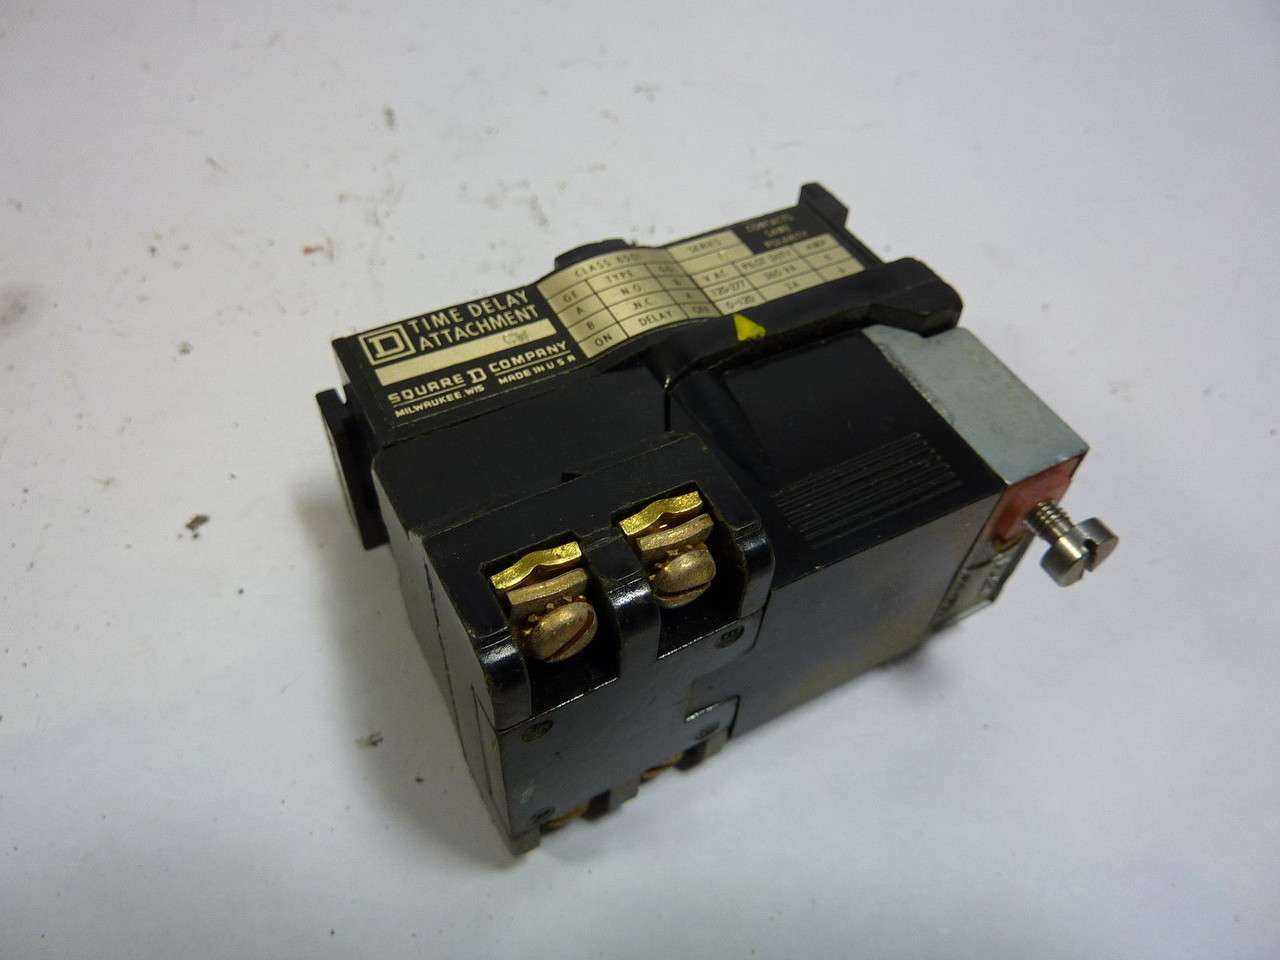 Square D 8501-CW Time Delay Overload Relay 120-277V USED